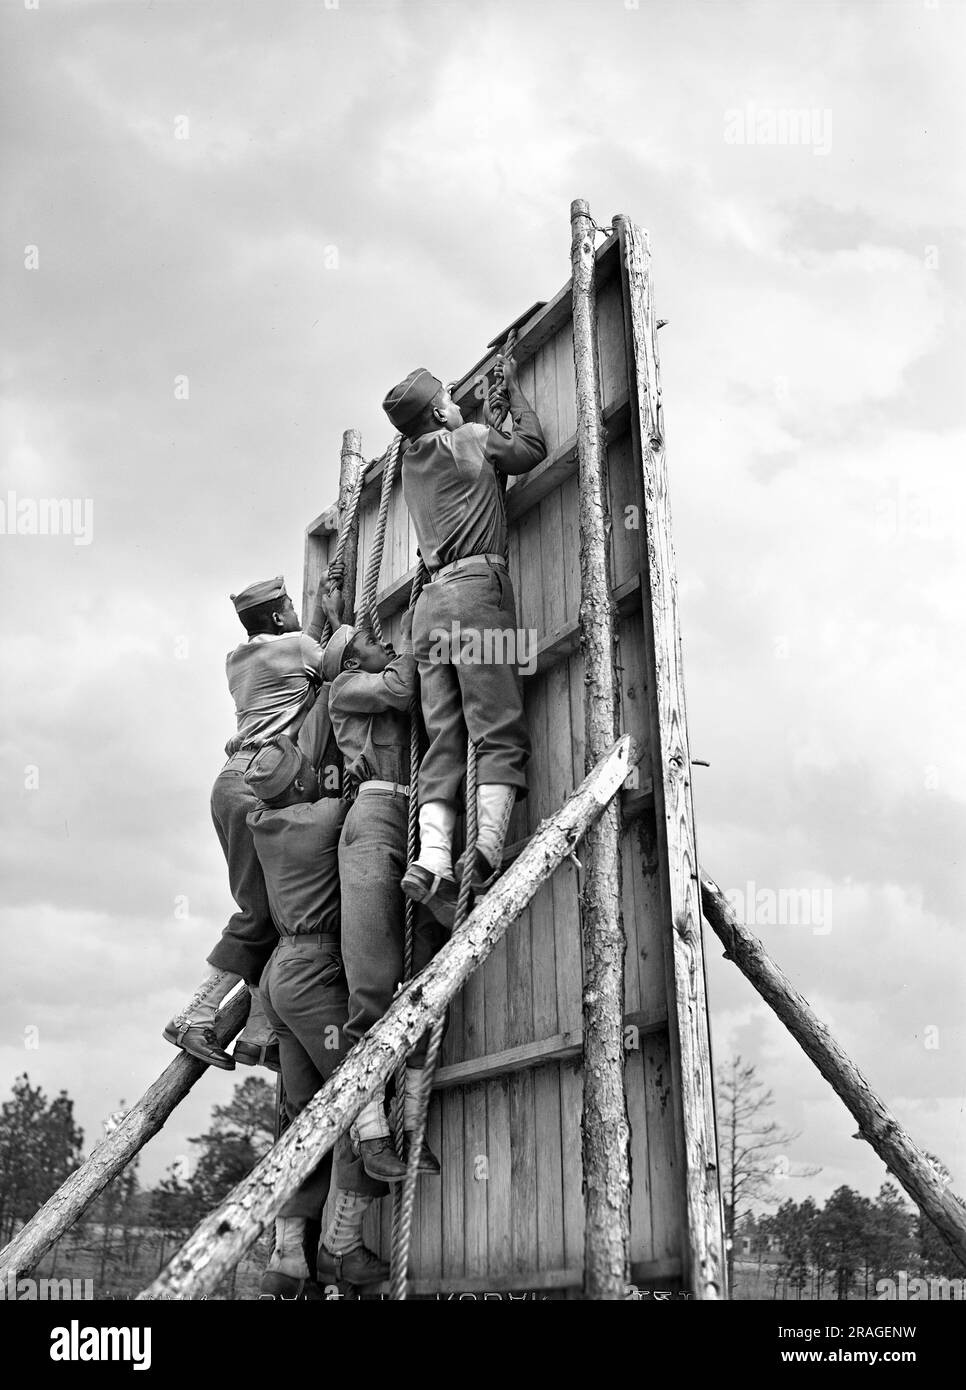 Soldiers of 41st Engineers on obstacle course, Fort Bragg, North Carolina, USA, Arthur Rothstein, U.S. Office of War Information, March 1942 Stock Photo